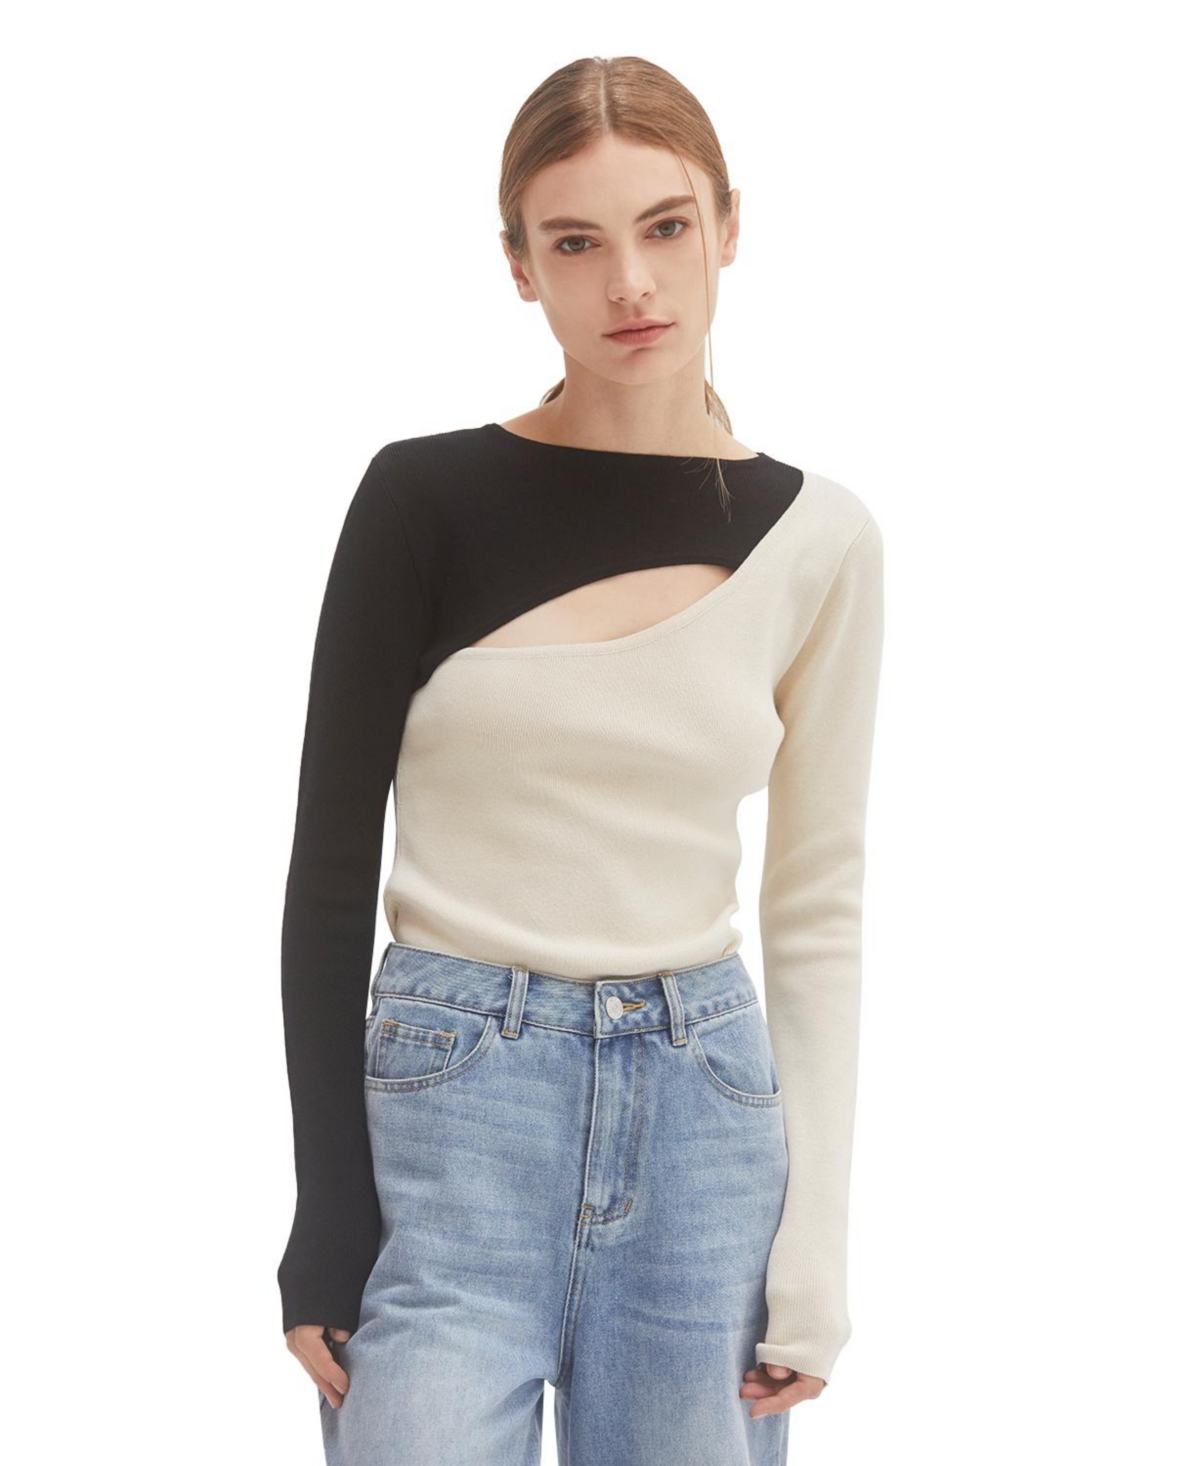 Women's Carly Color Block Knit Top with Cut Out Detail - Black + black/cream